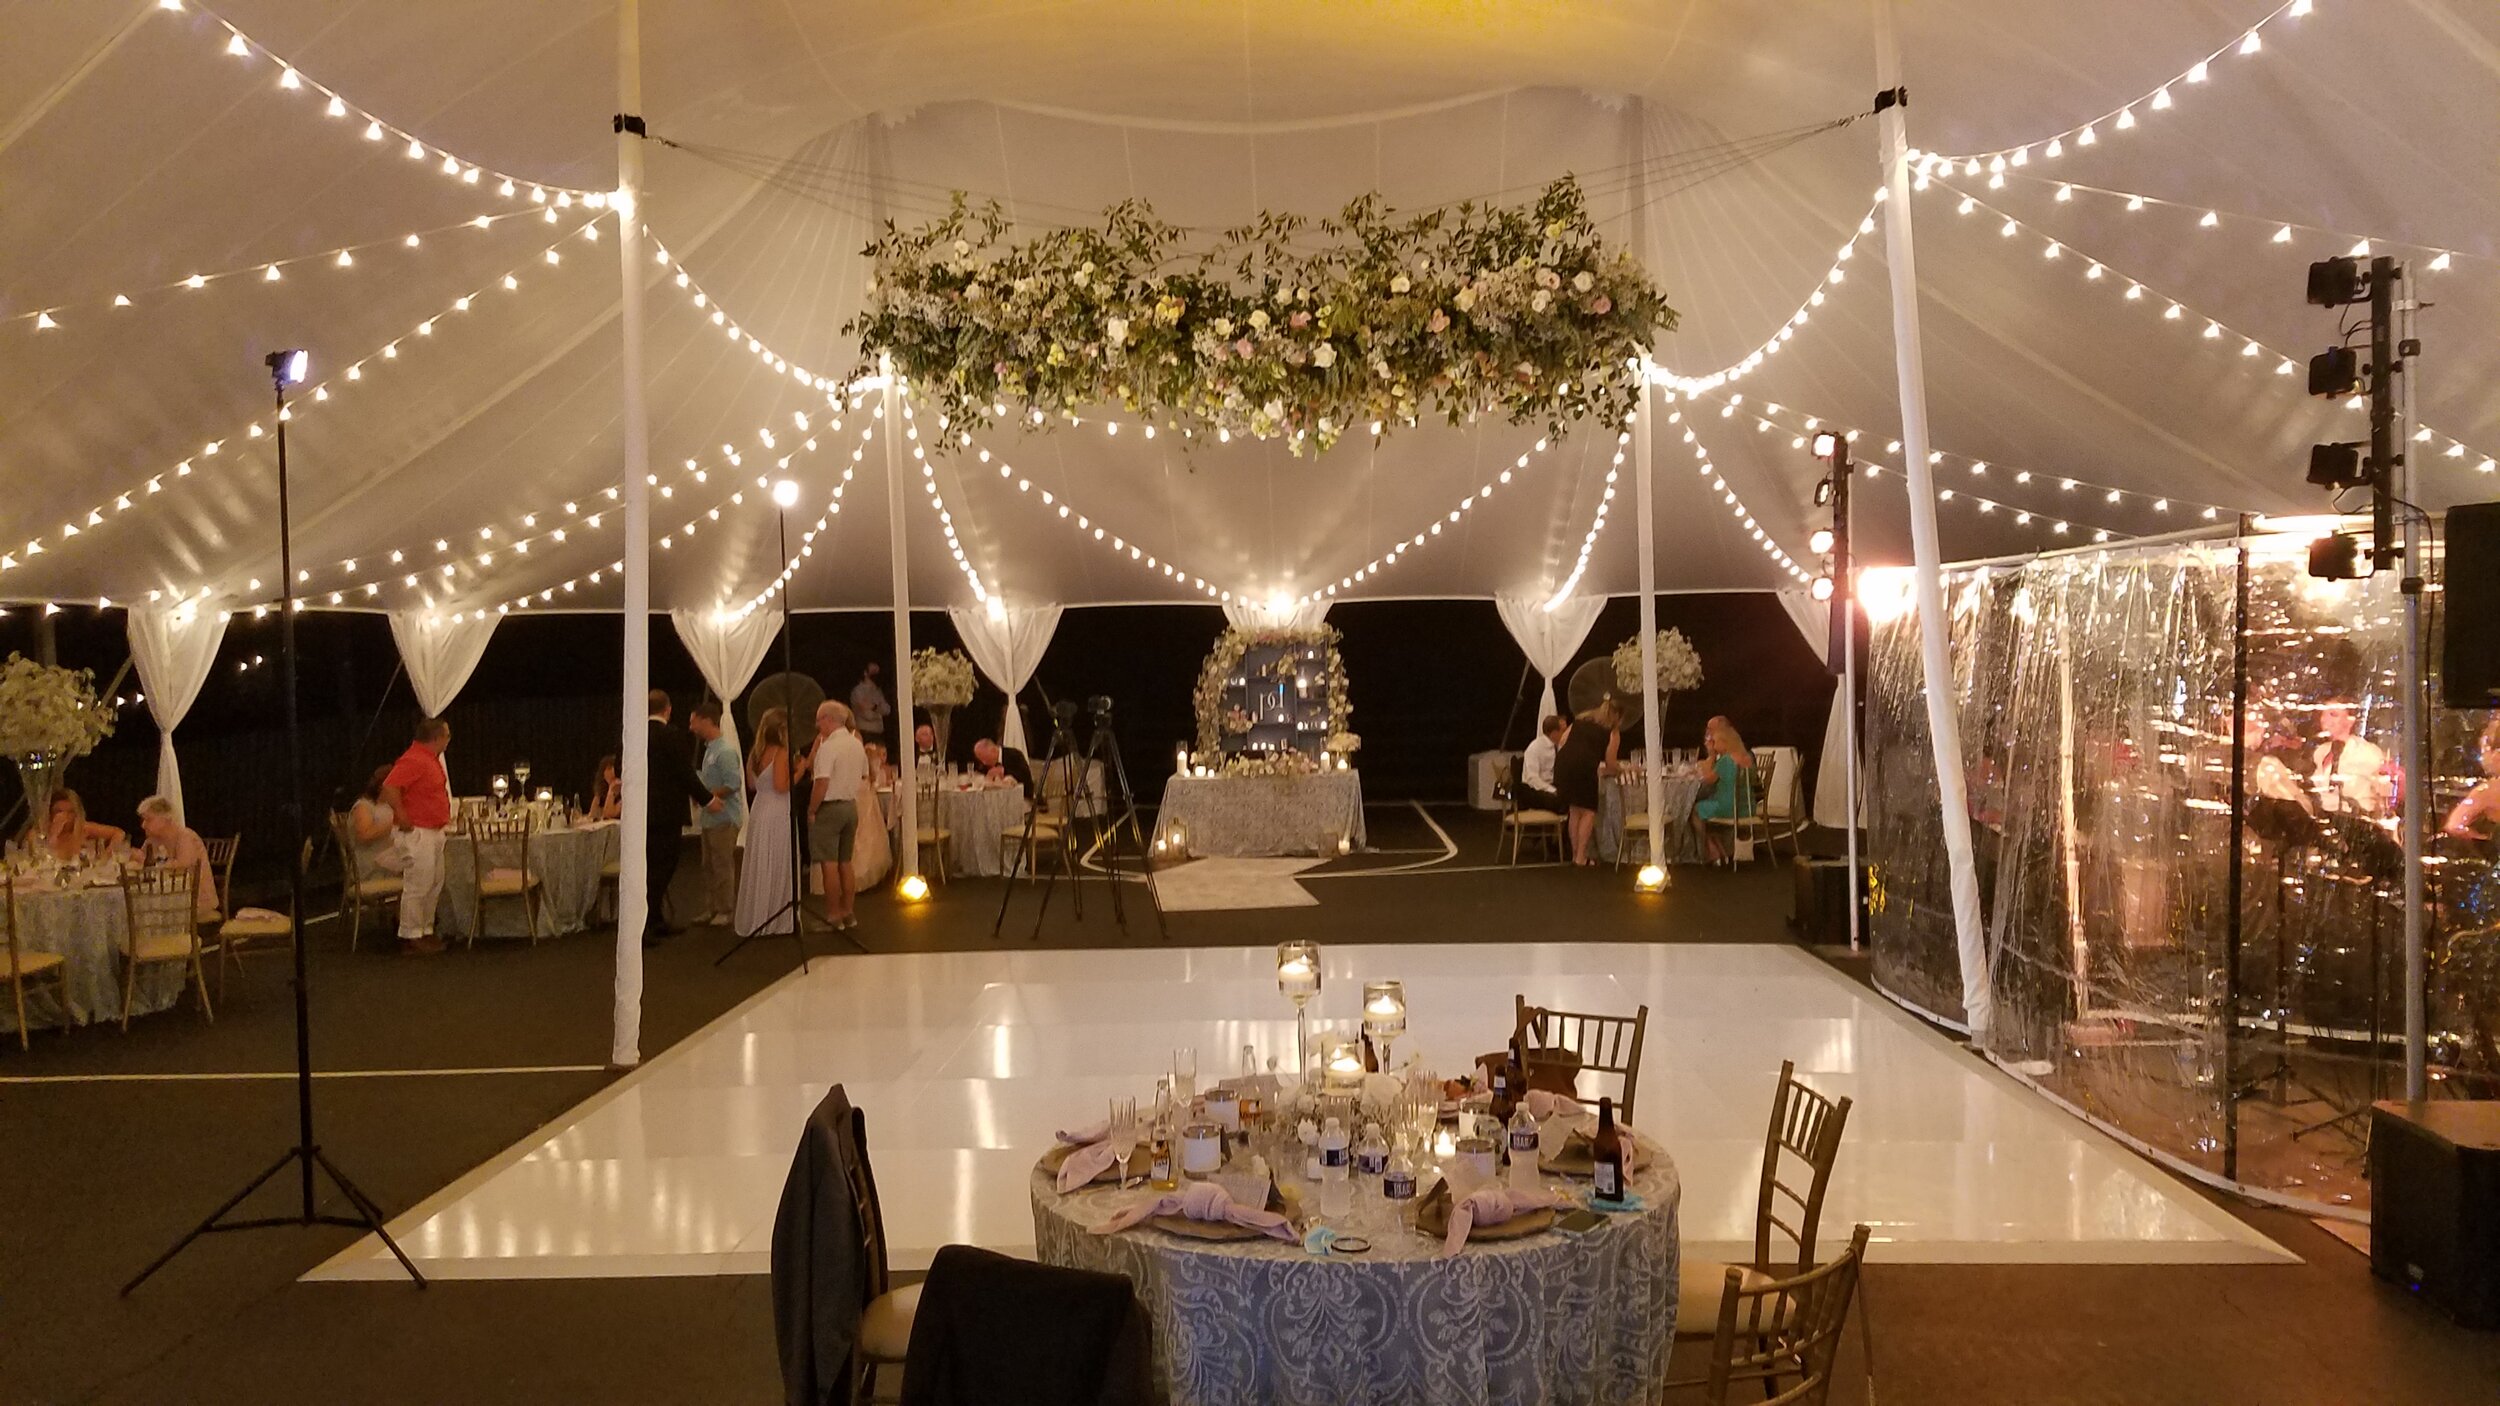 59x sailcloth wedding tent with white floor